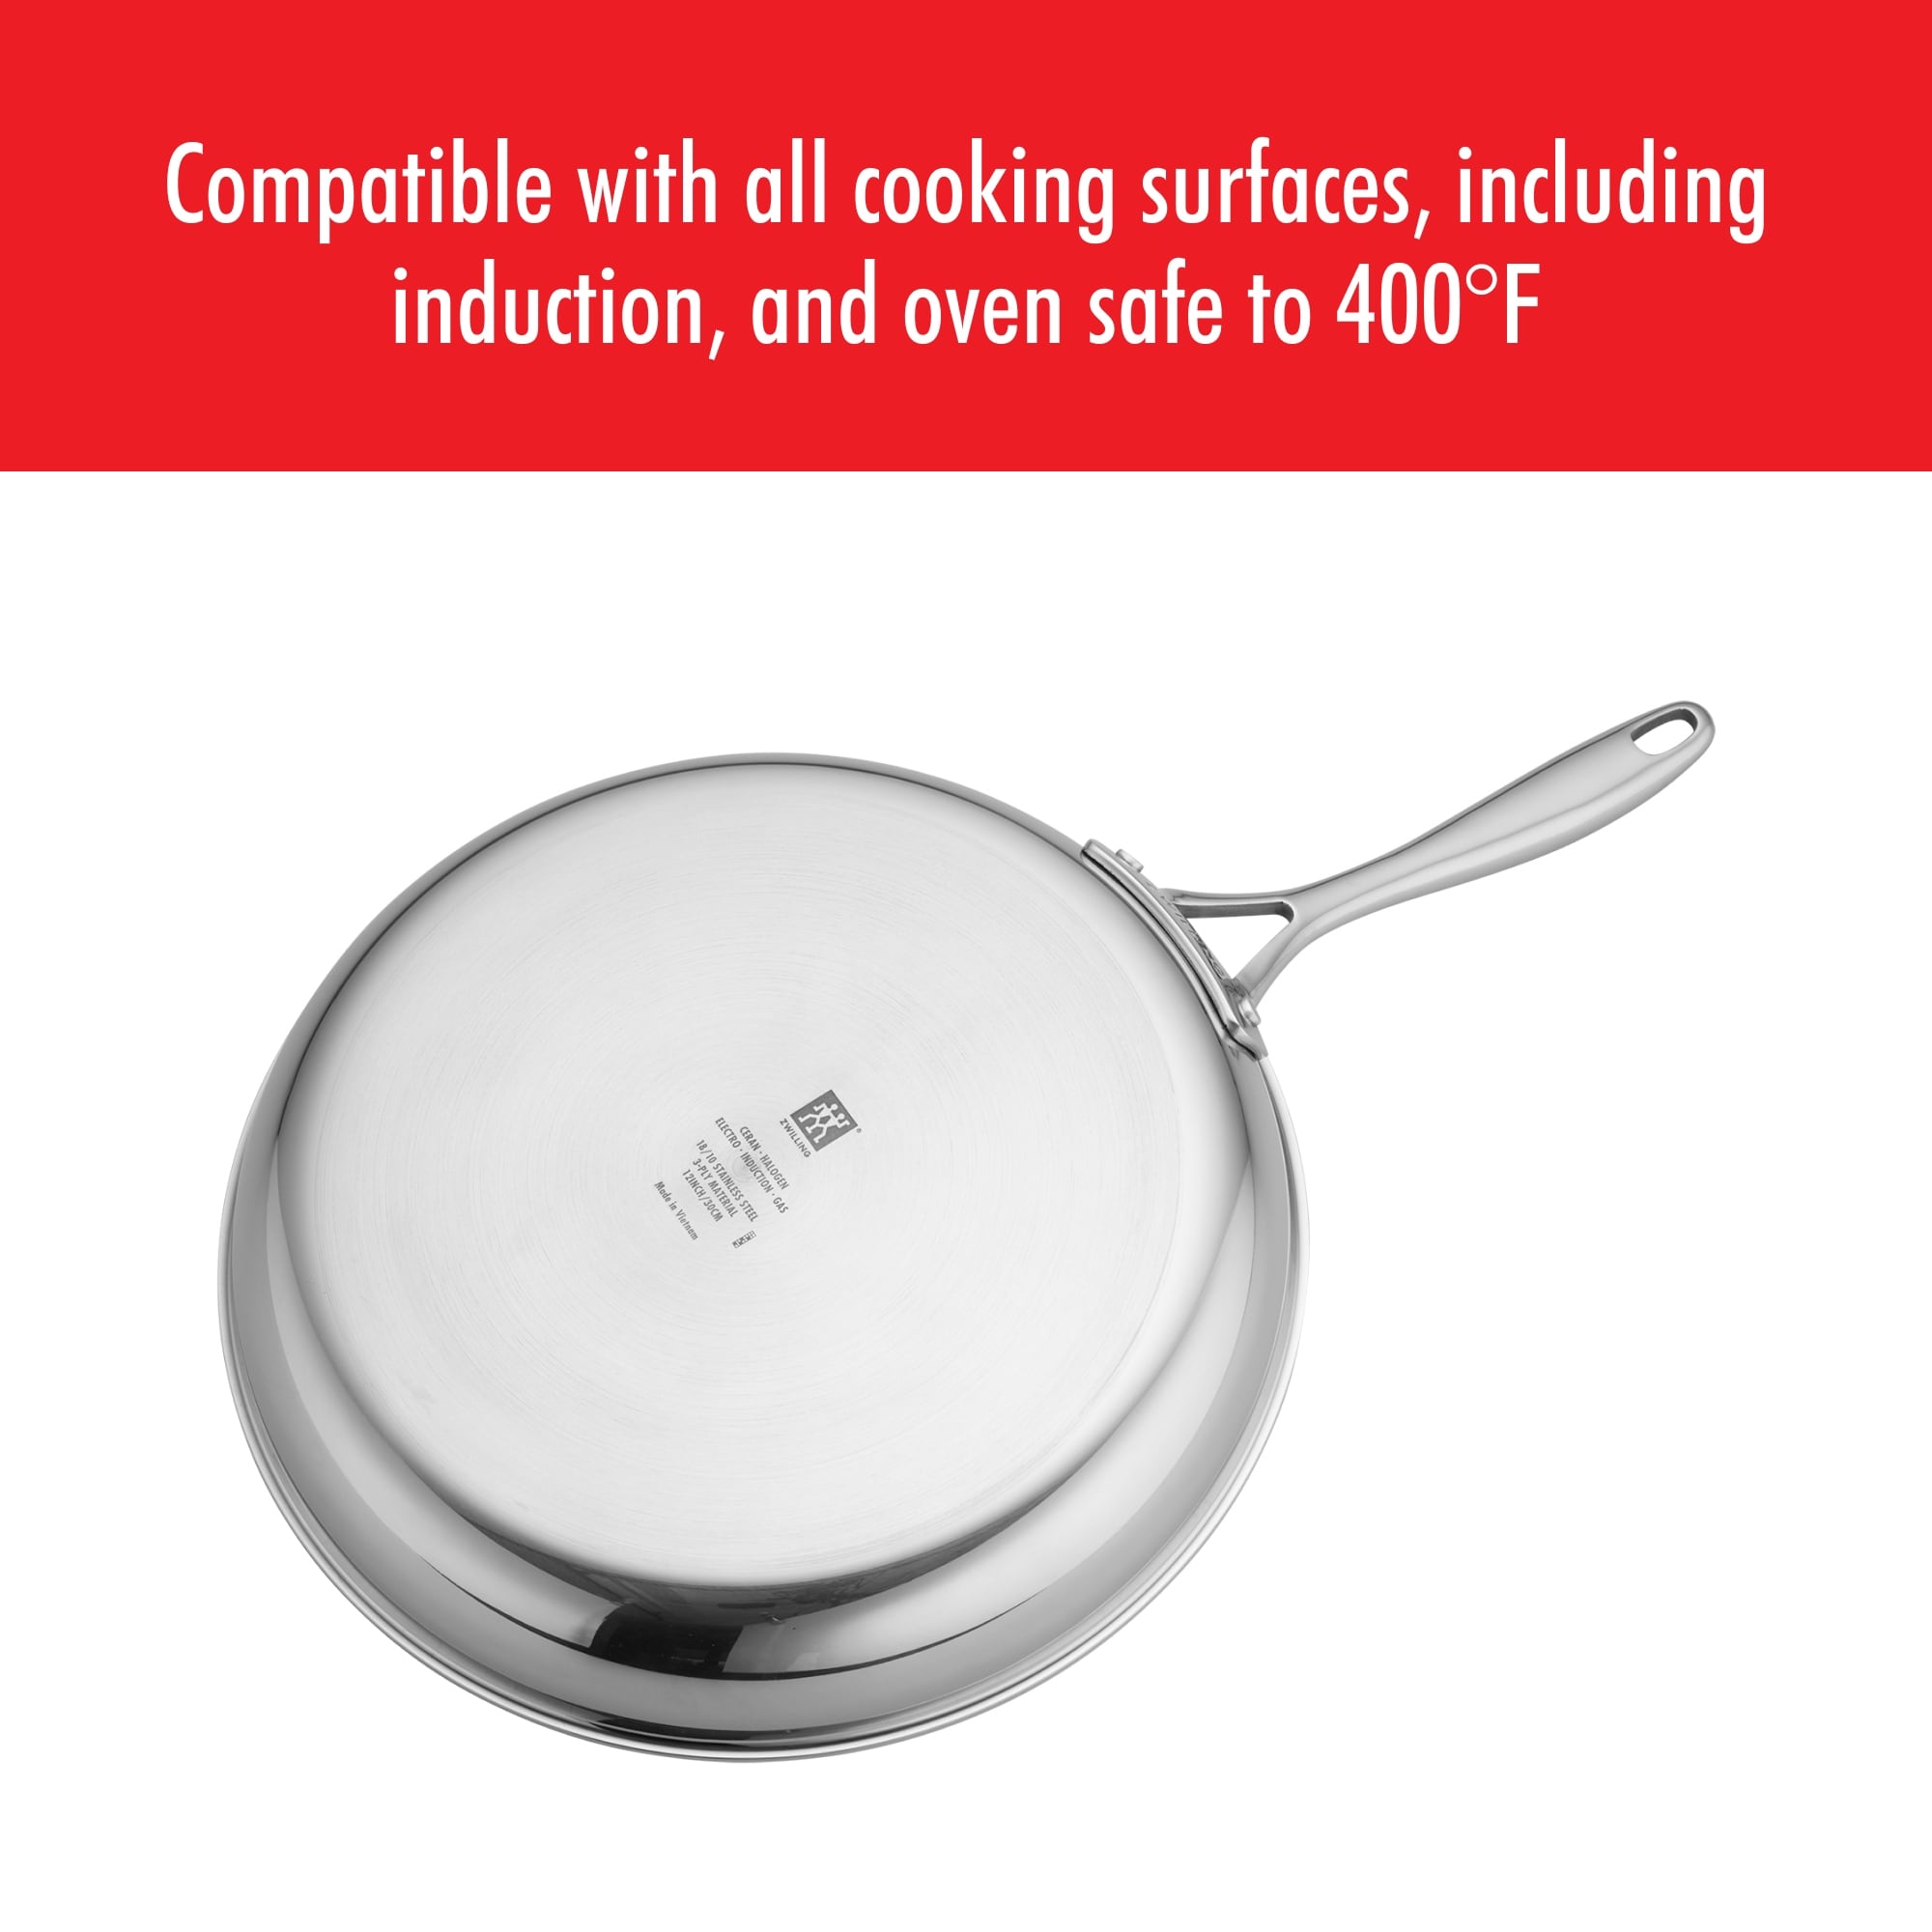 https://ak1.ostkcdn.com/images/products/is/images/direct/3a7f43a966b3841f84b8ceb04f957440d7c3eadf/ZWILLING-Clad-CFX-Stainless-Steel-Ceramic-Nonstick-Fry-Pan.jpg